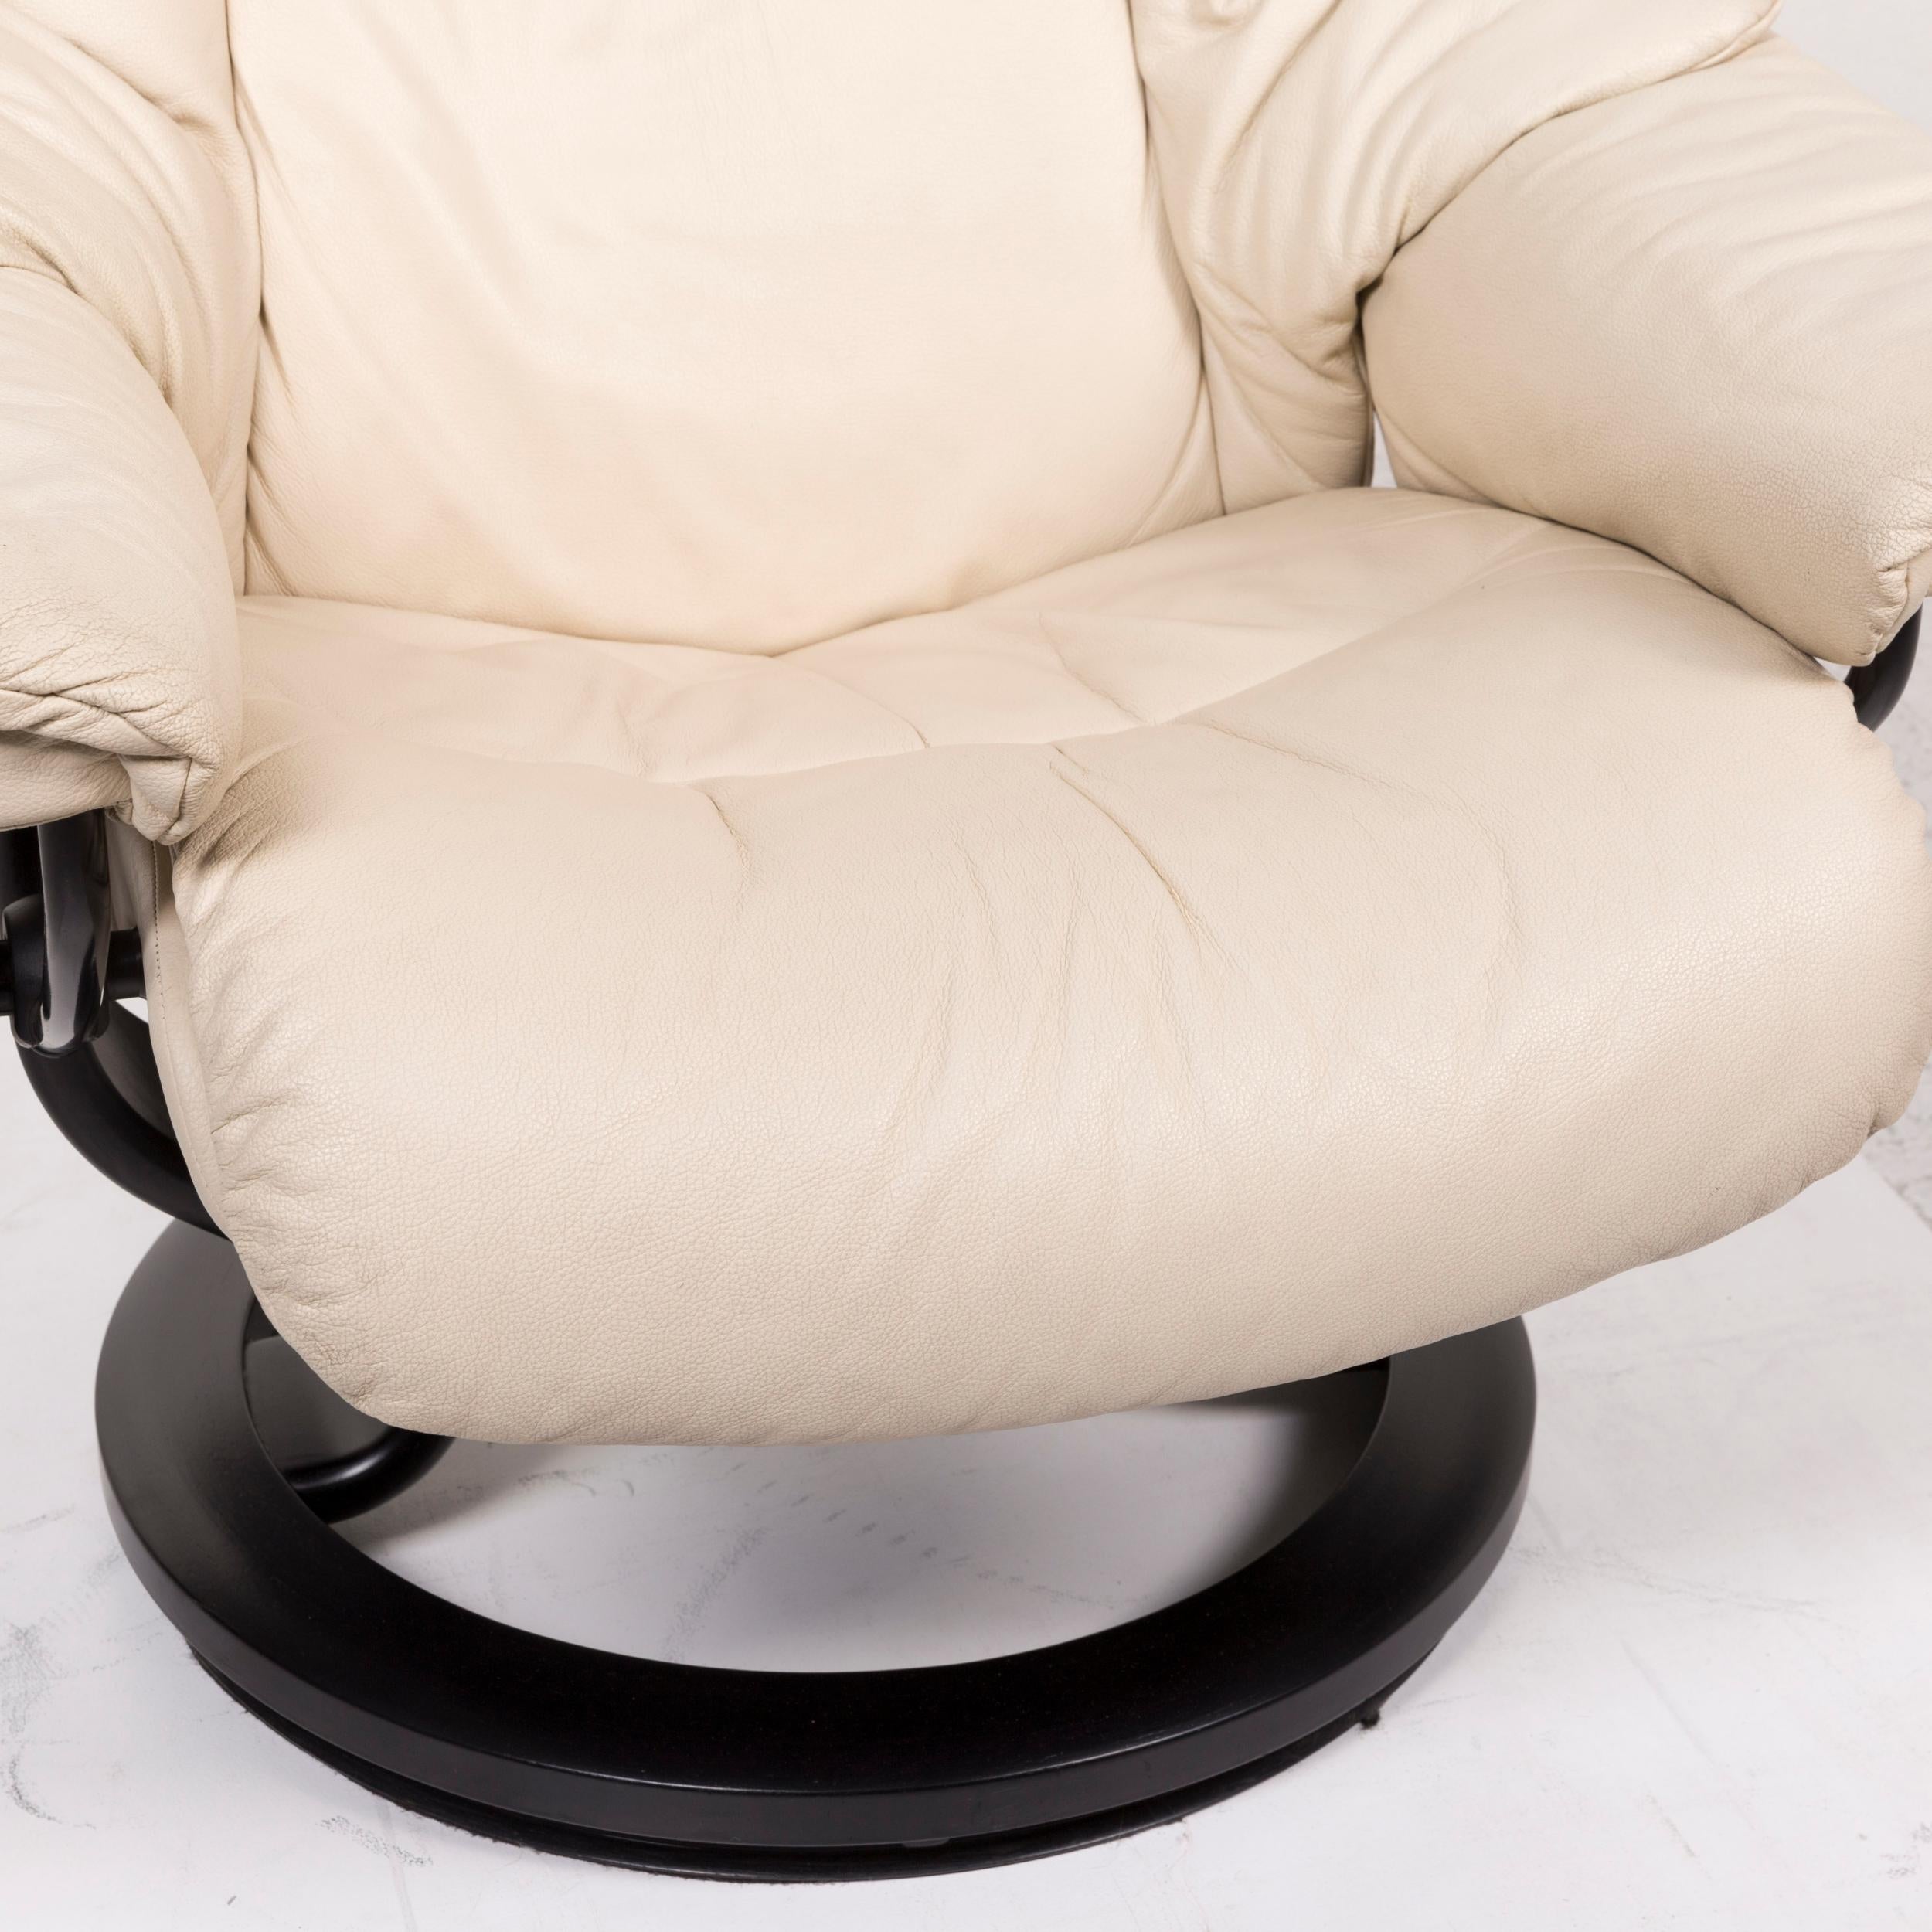 We bring to you a stressless Reno leather armchair cream incl. stool.
 
 

 Product measurements in centimeters:
 

Depth 75
Width 80
Height 96
Seat-height 42
Rest-height 55
Seat-depth 48
Seat-width 55
Back-height 63.